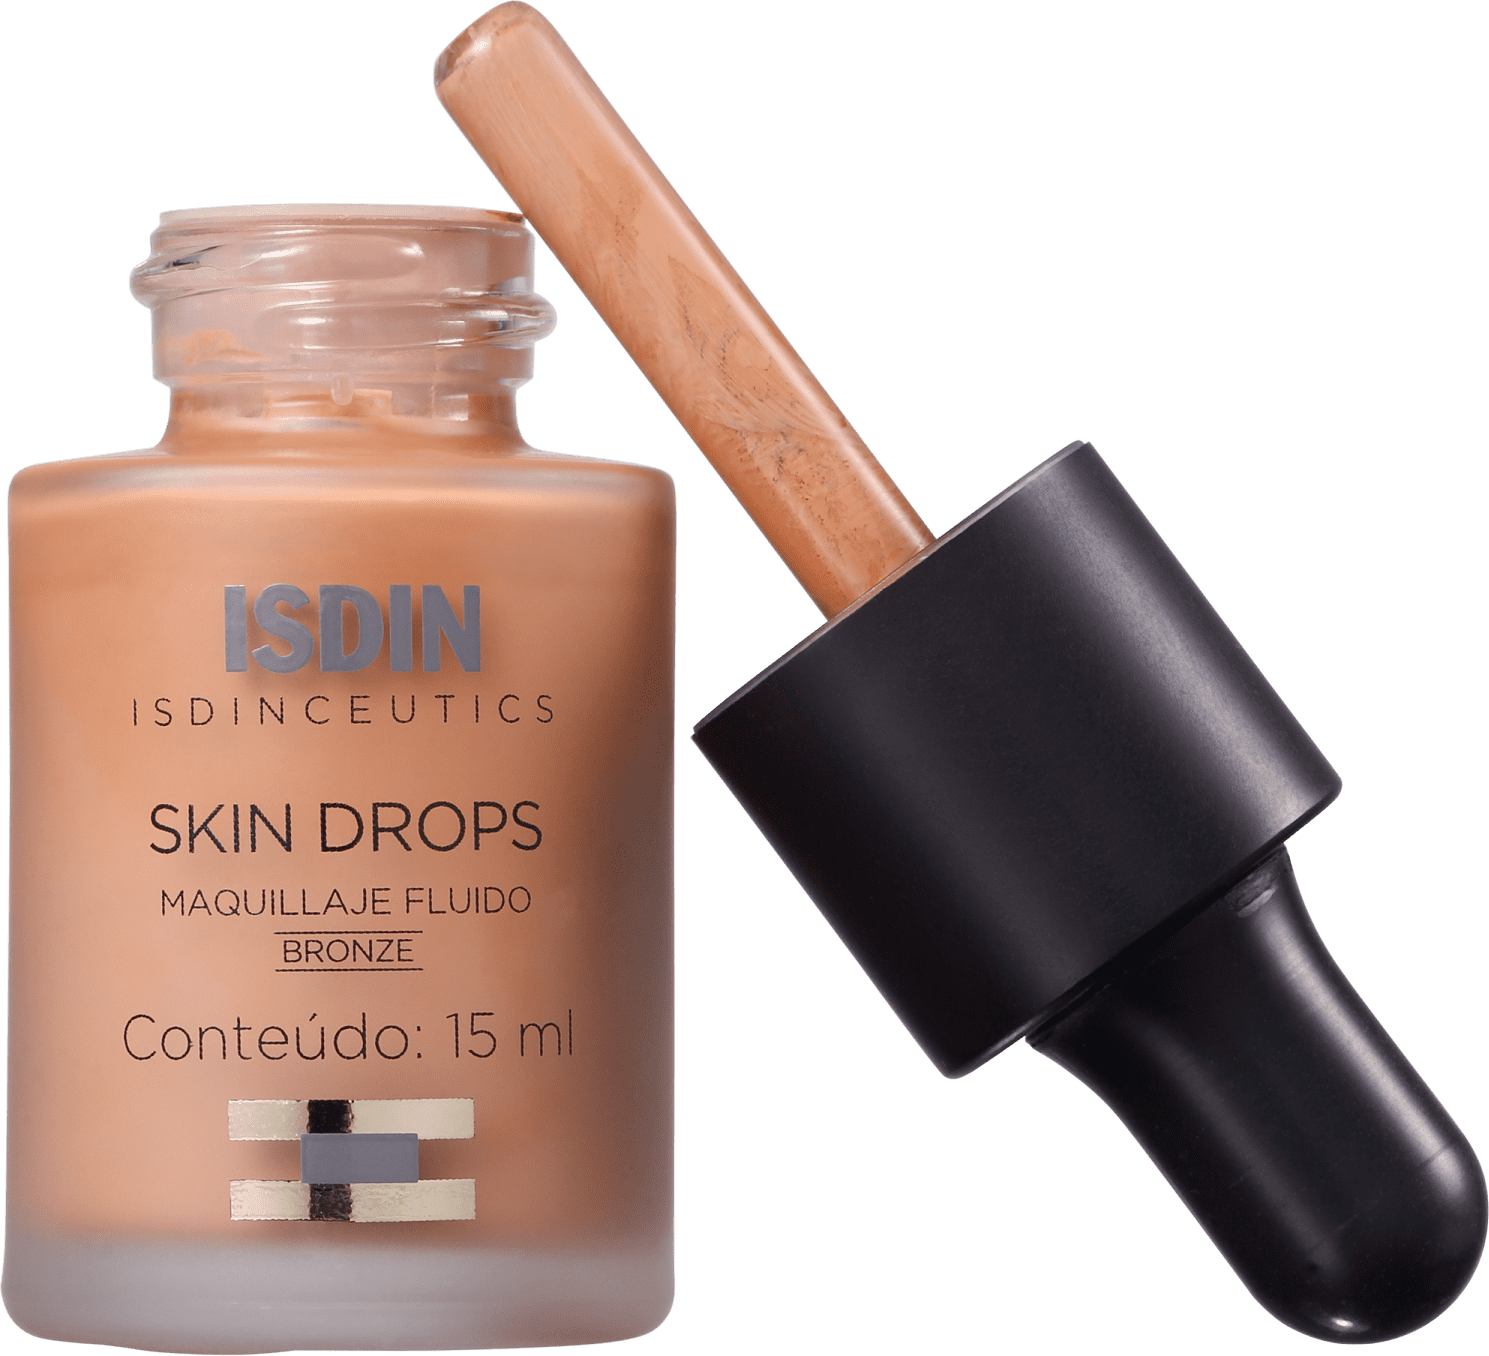  ISDIN Skin Drops, Face and Body Makeup Lightweight and